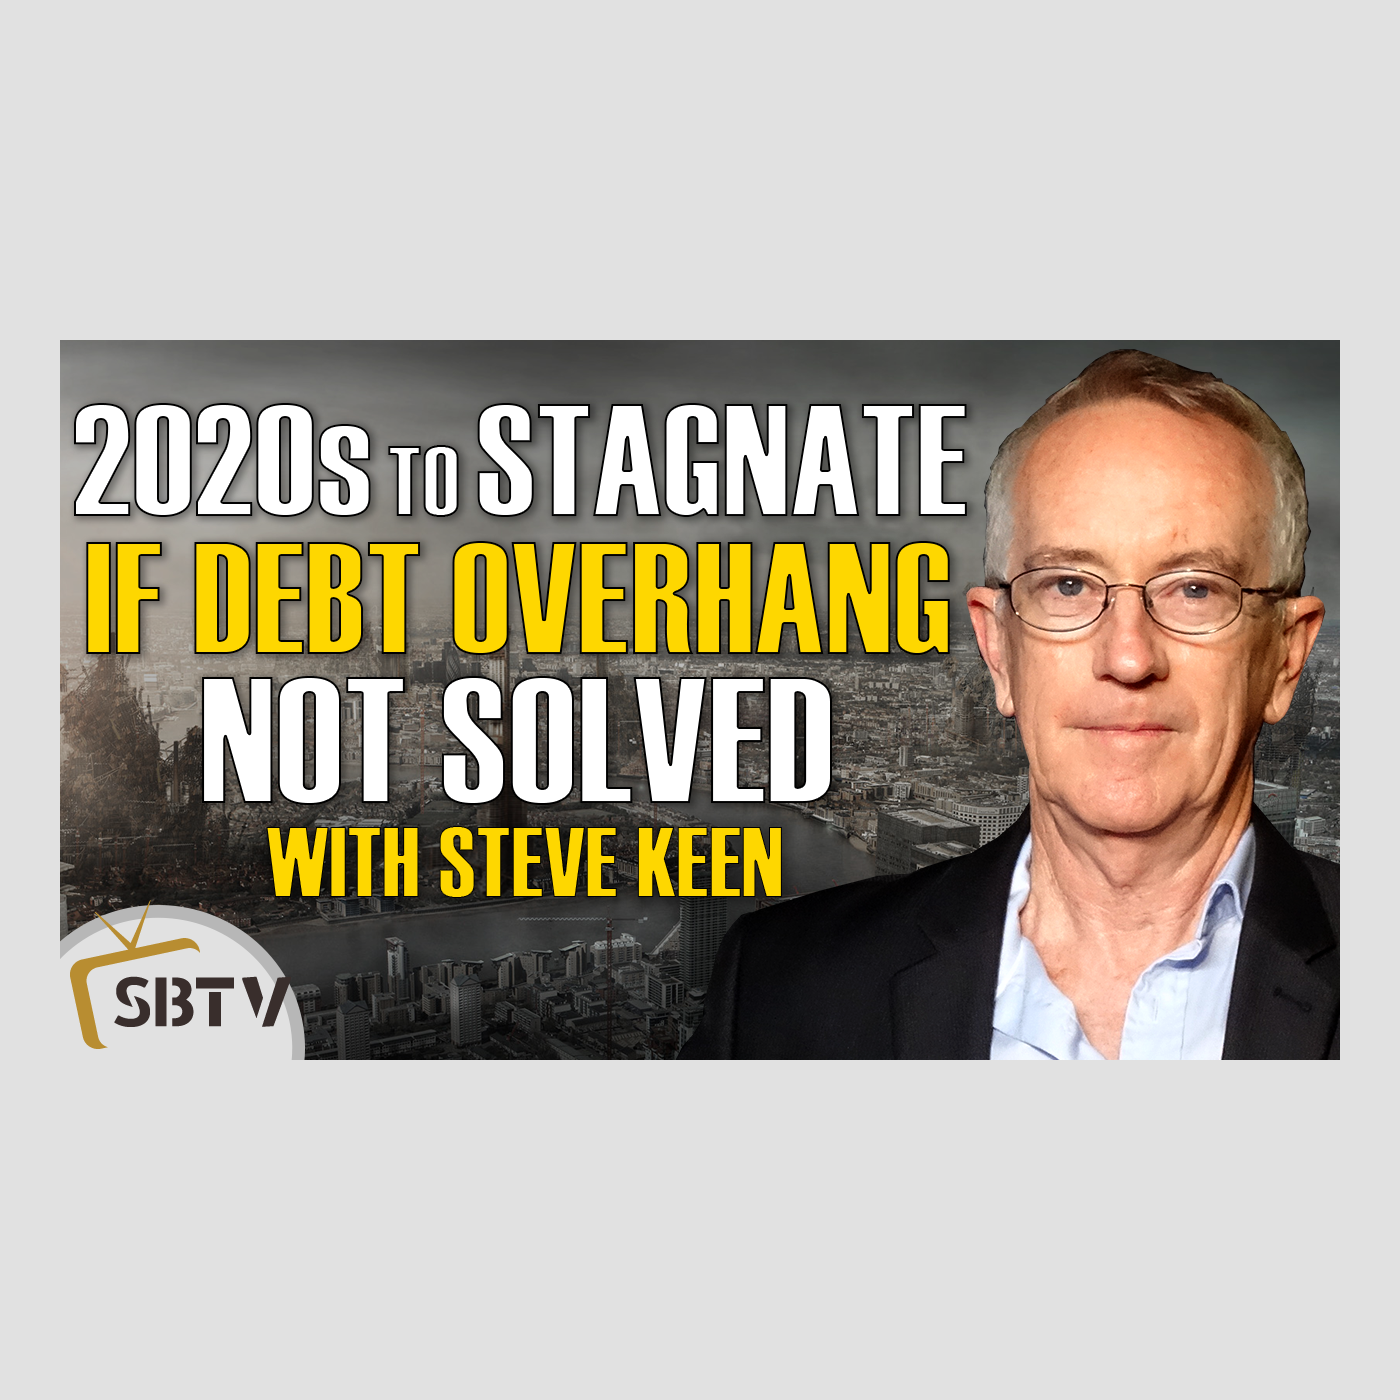 87 Steve Keen - 2020s to Stagnate If Private Debt Overhang Is Not Reduced